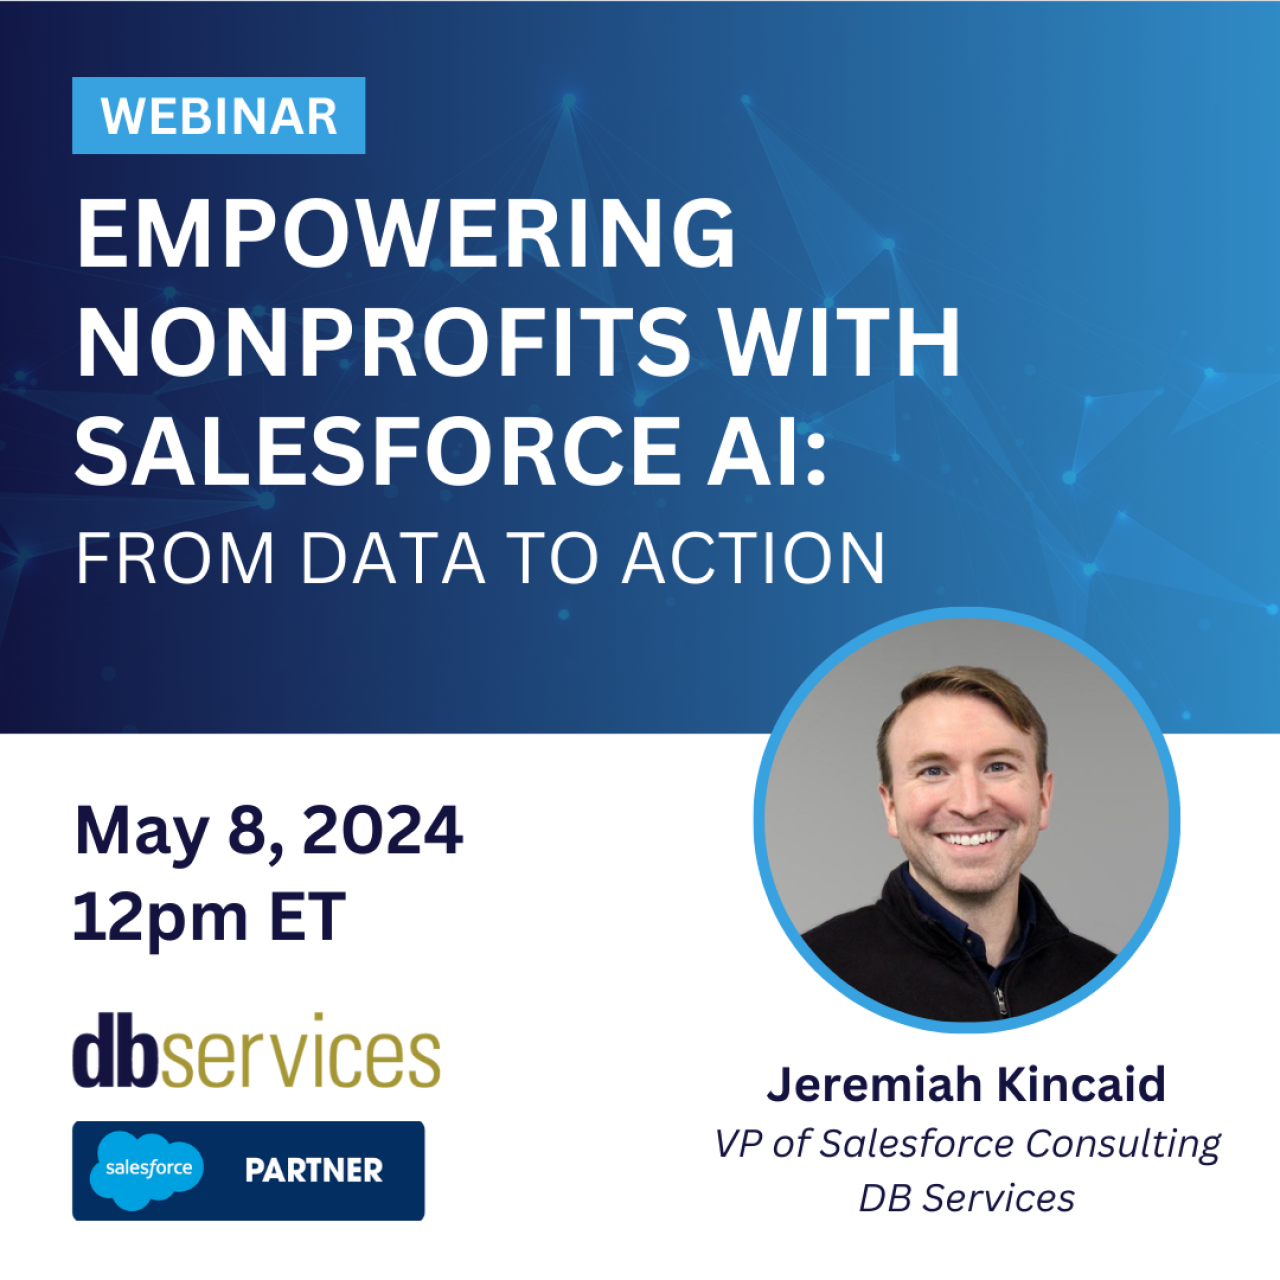 empowering nonprofits with salesforce ai webinar.